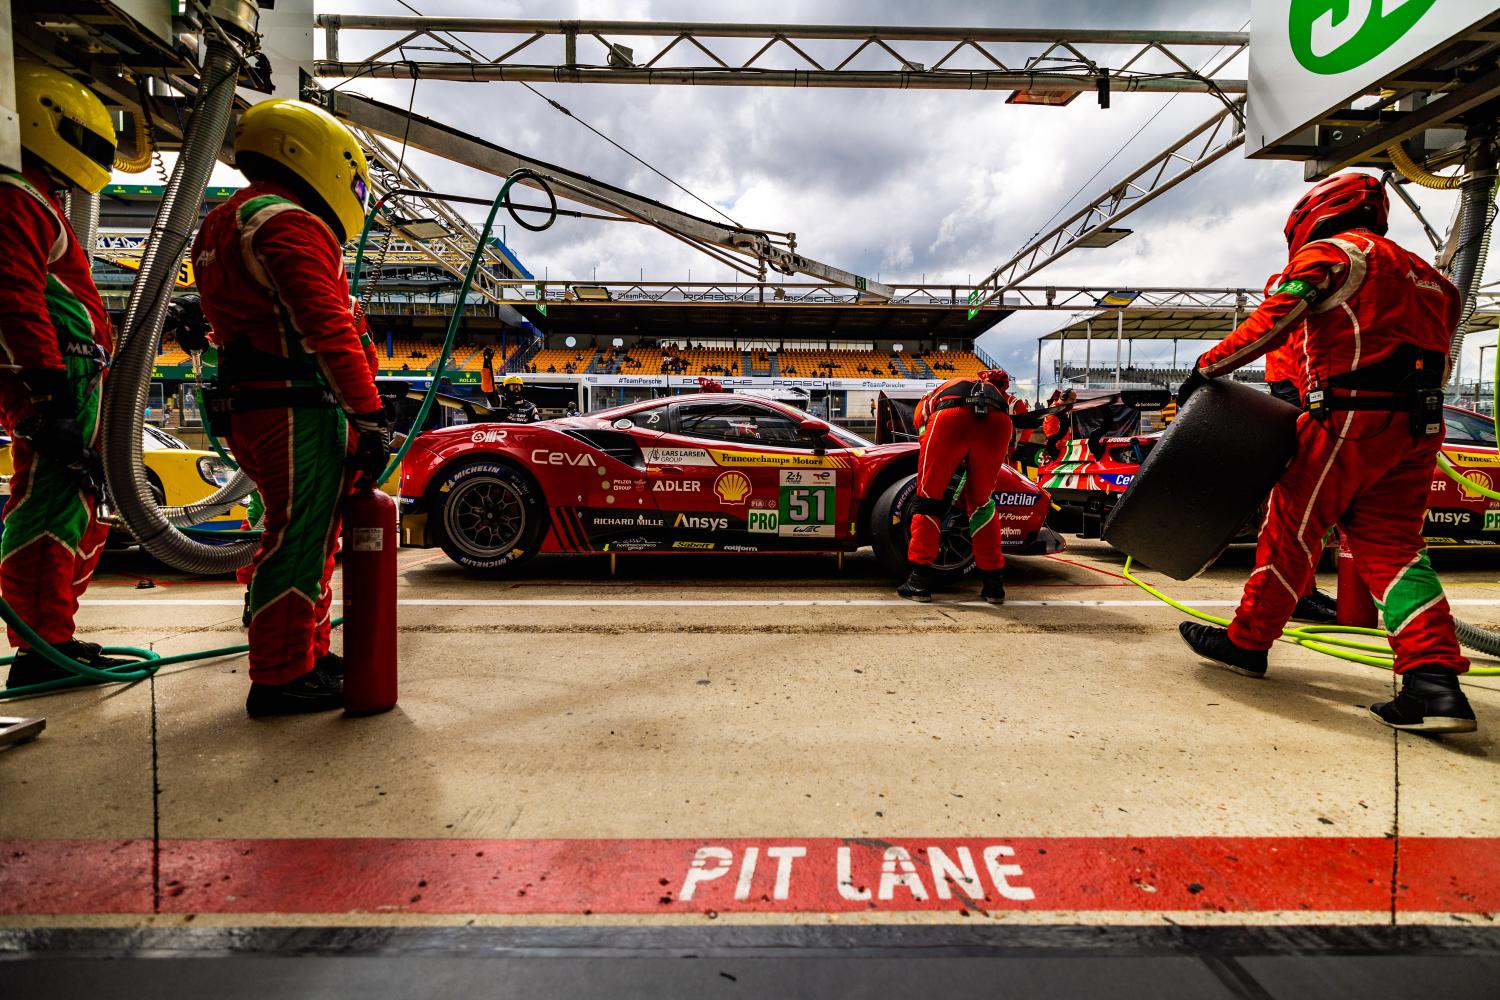 Luxus+ Magazine] For its return to the 24h of Le Mans, Ferrari is 